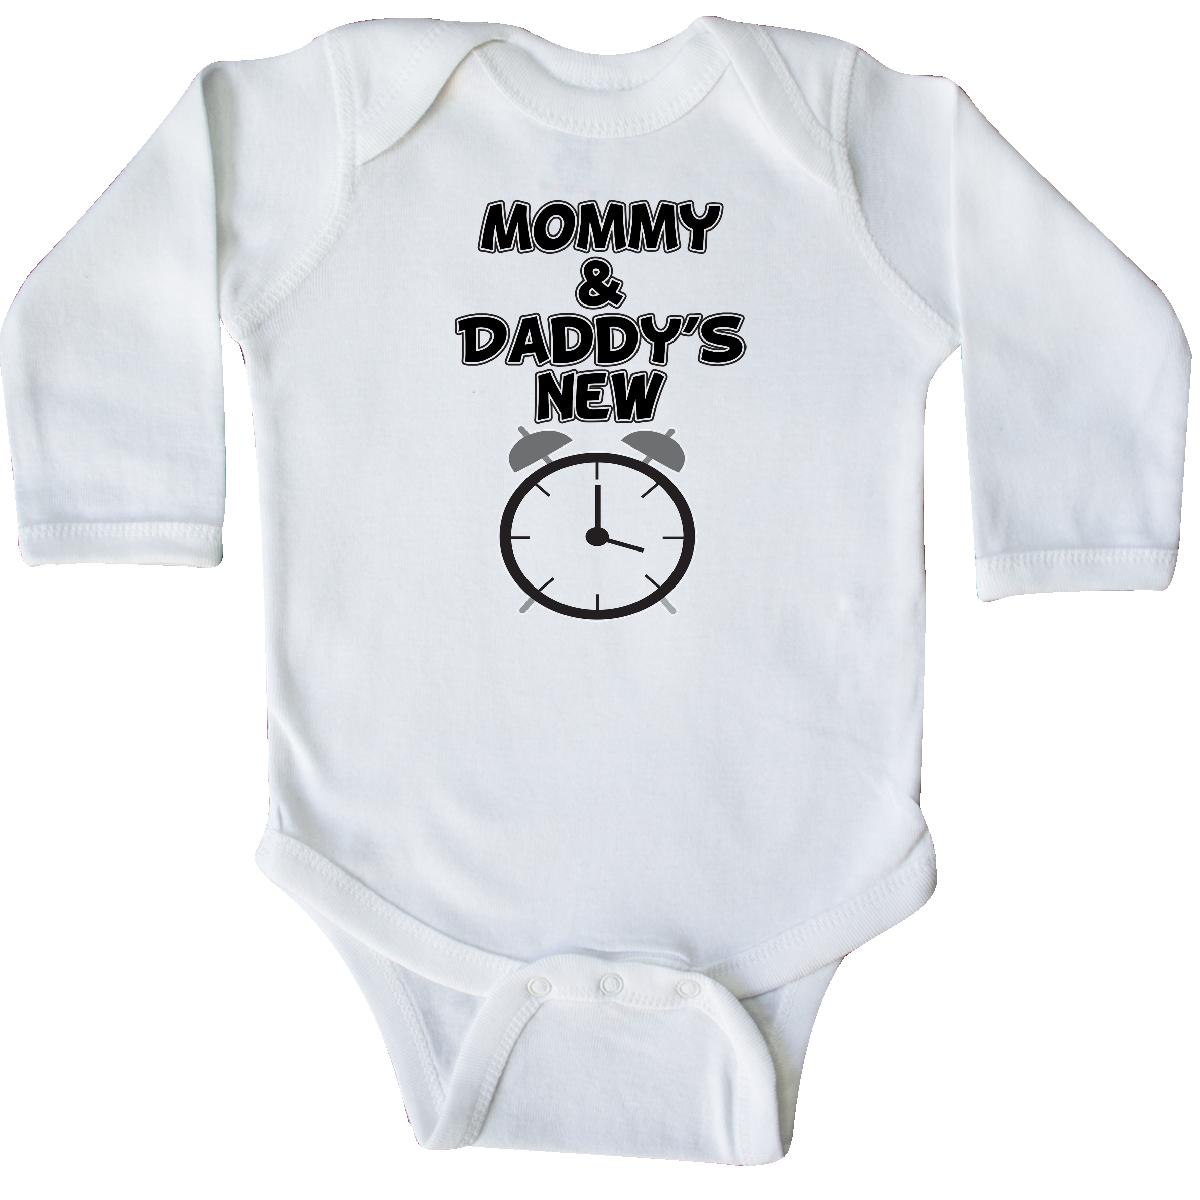 Inktastic Mommy & Daddy's New Alarm Clock Long Sleeve Creeper Funny Humor Laughs